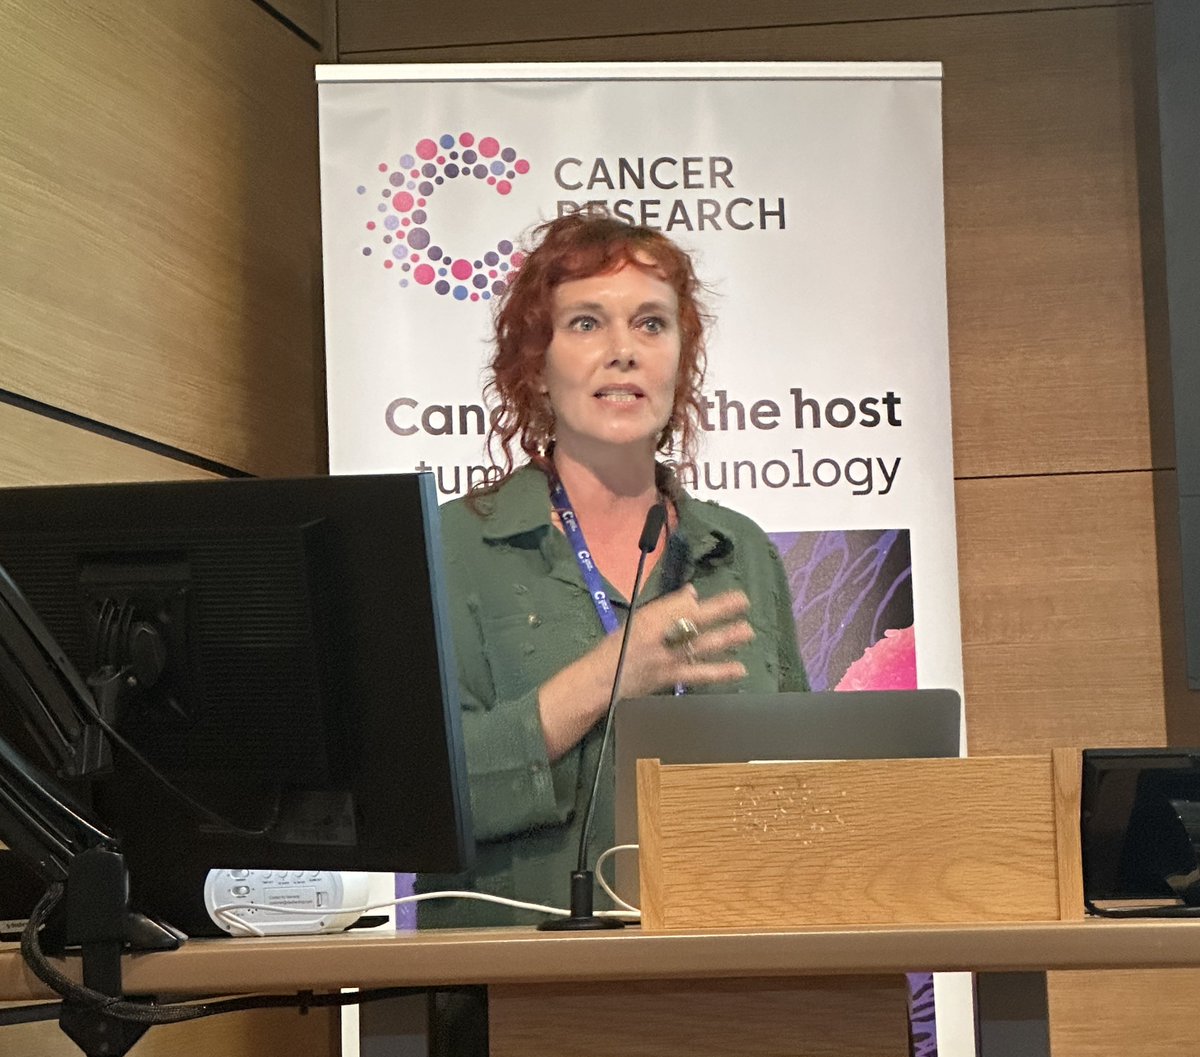 Jessica Strid is presenting on the role of eosinophils in skin homeostasis, inflammation and carcinogenesis at #CancerHostTI24